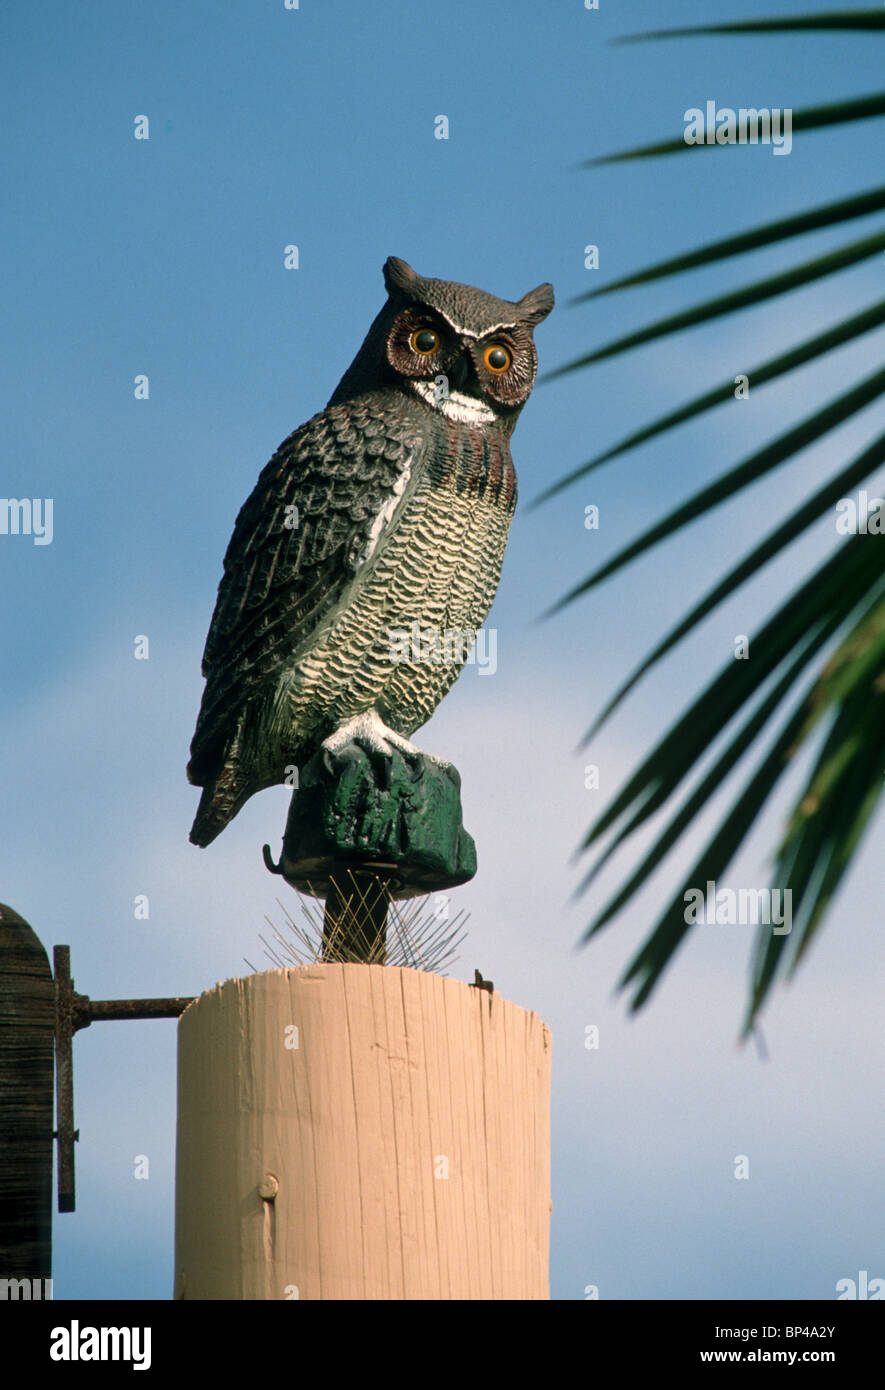 Plastic Great Horned Owl used to keep birds from landing on things. Note small spikes below owl, another deterrent for birds. Stock Photo